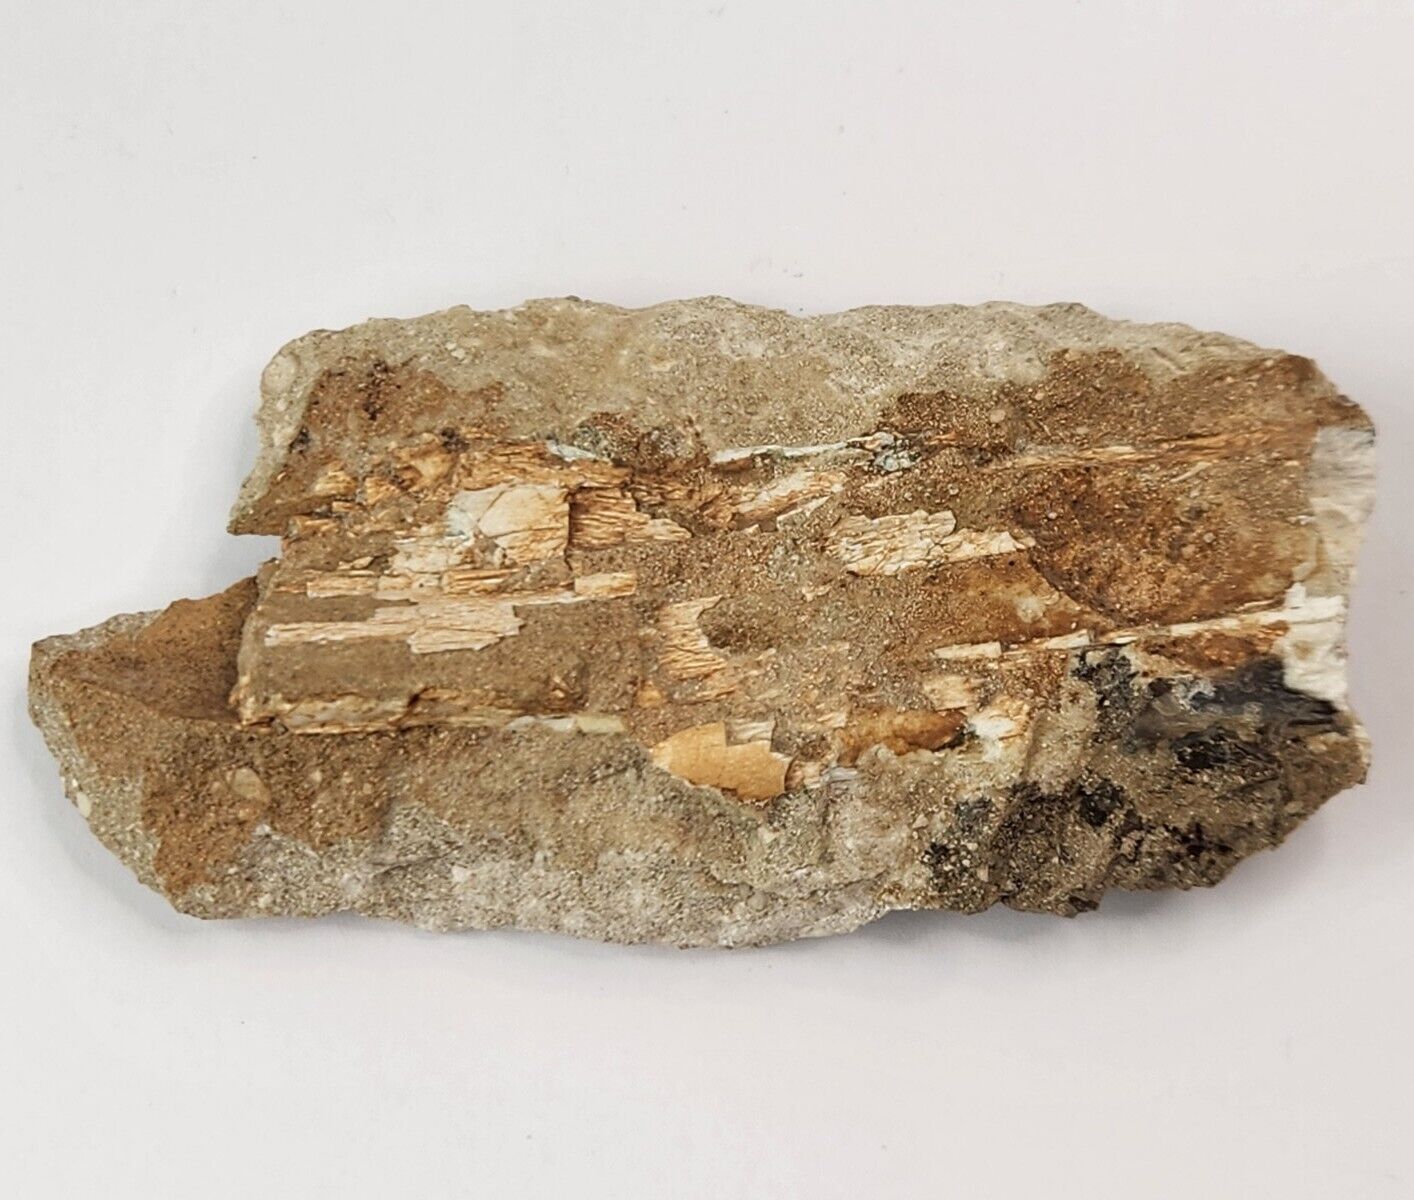 Odontopteryx Toothed Bird Bone Fossil - Ouled Abdoun Basin - Oued Zem, Morocco 